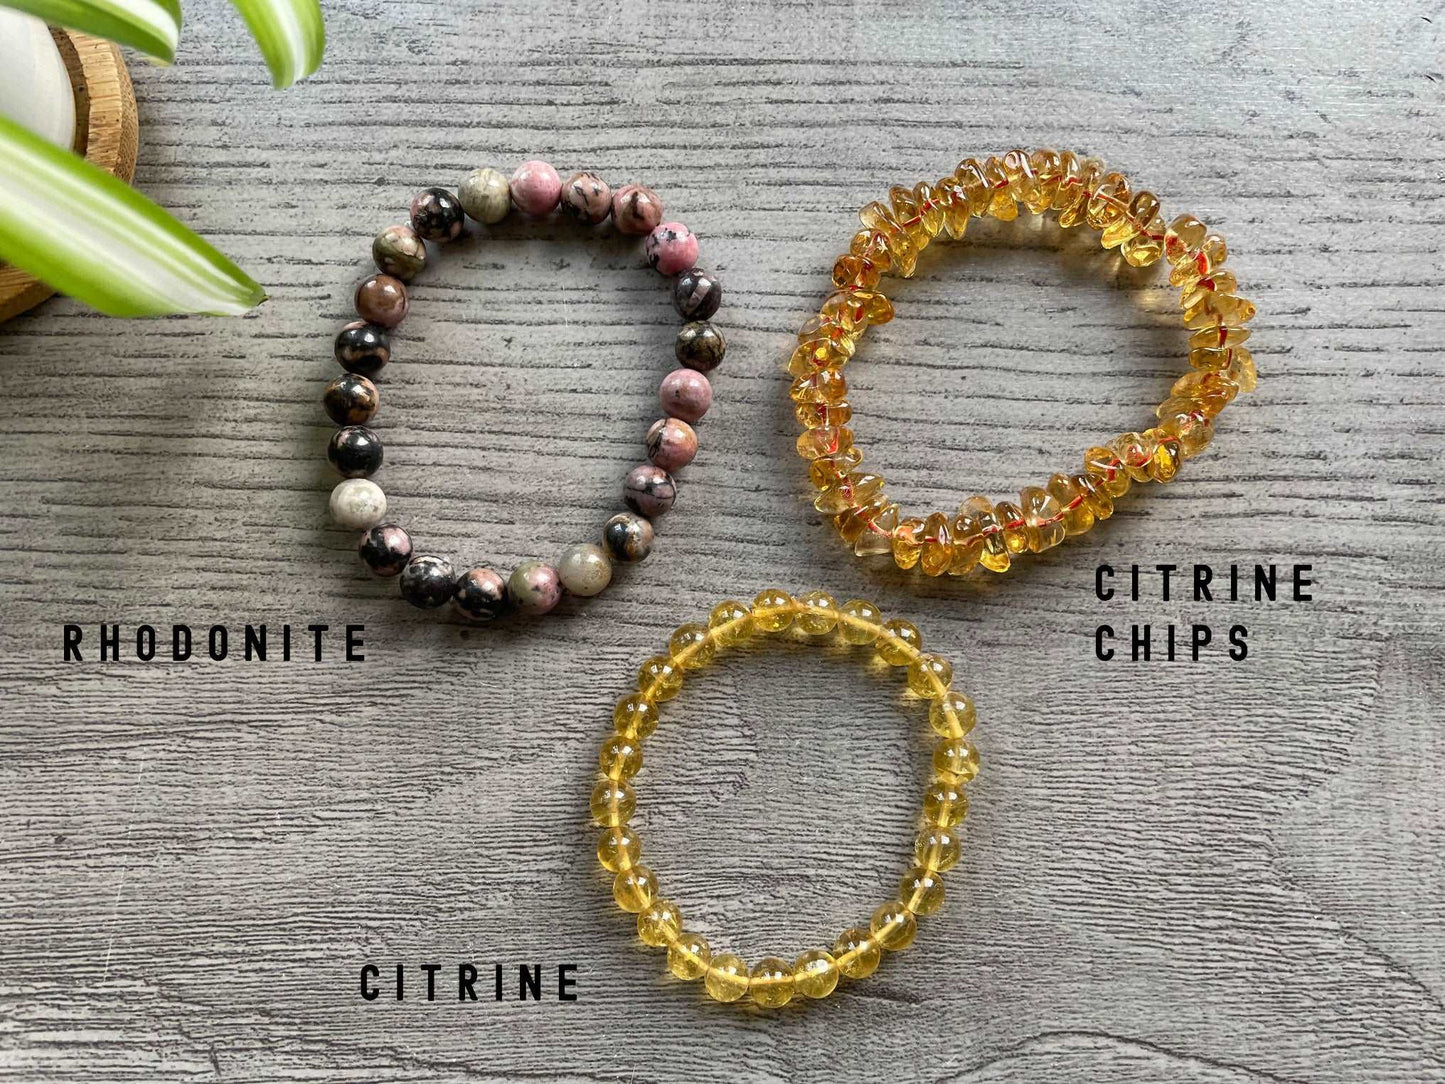 Pictured is a rhodonite bead bracelet, a citreine chip bracelet, and a citrine bead bracelet.